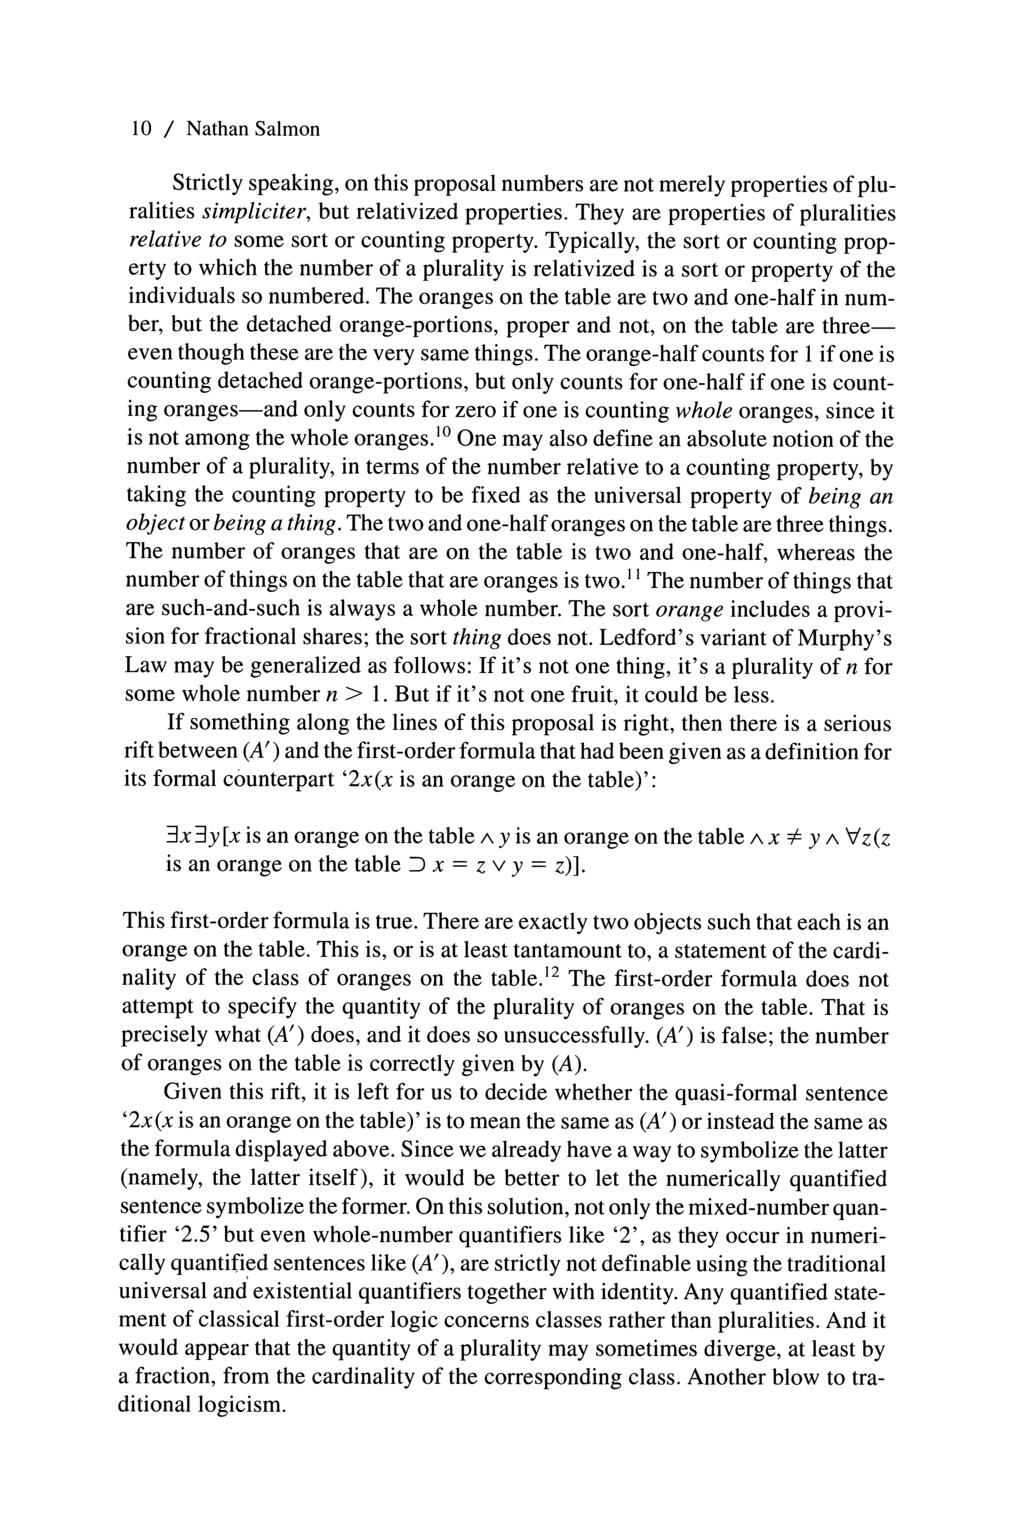 10 / Nathan Salmon Strictly speaking, on this proposal numbers are not merely properties of pluralities simpliciter, but relativized properties.